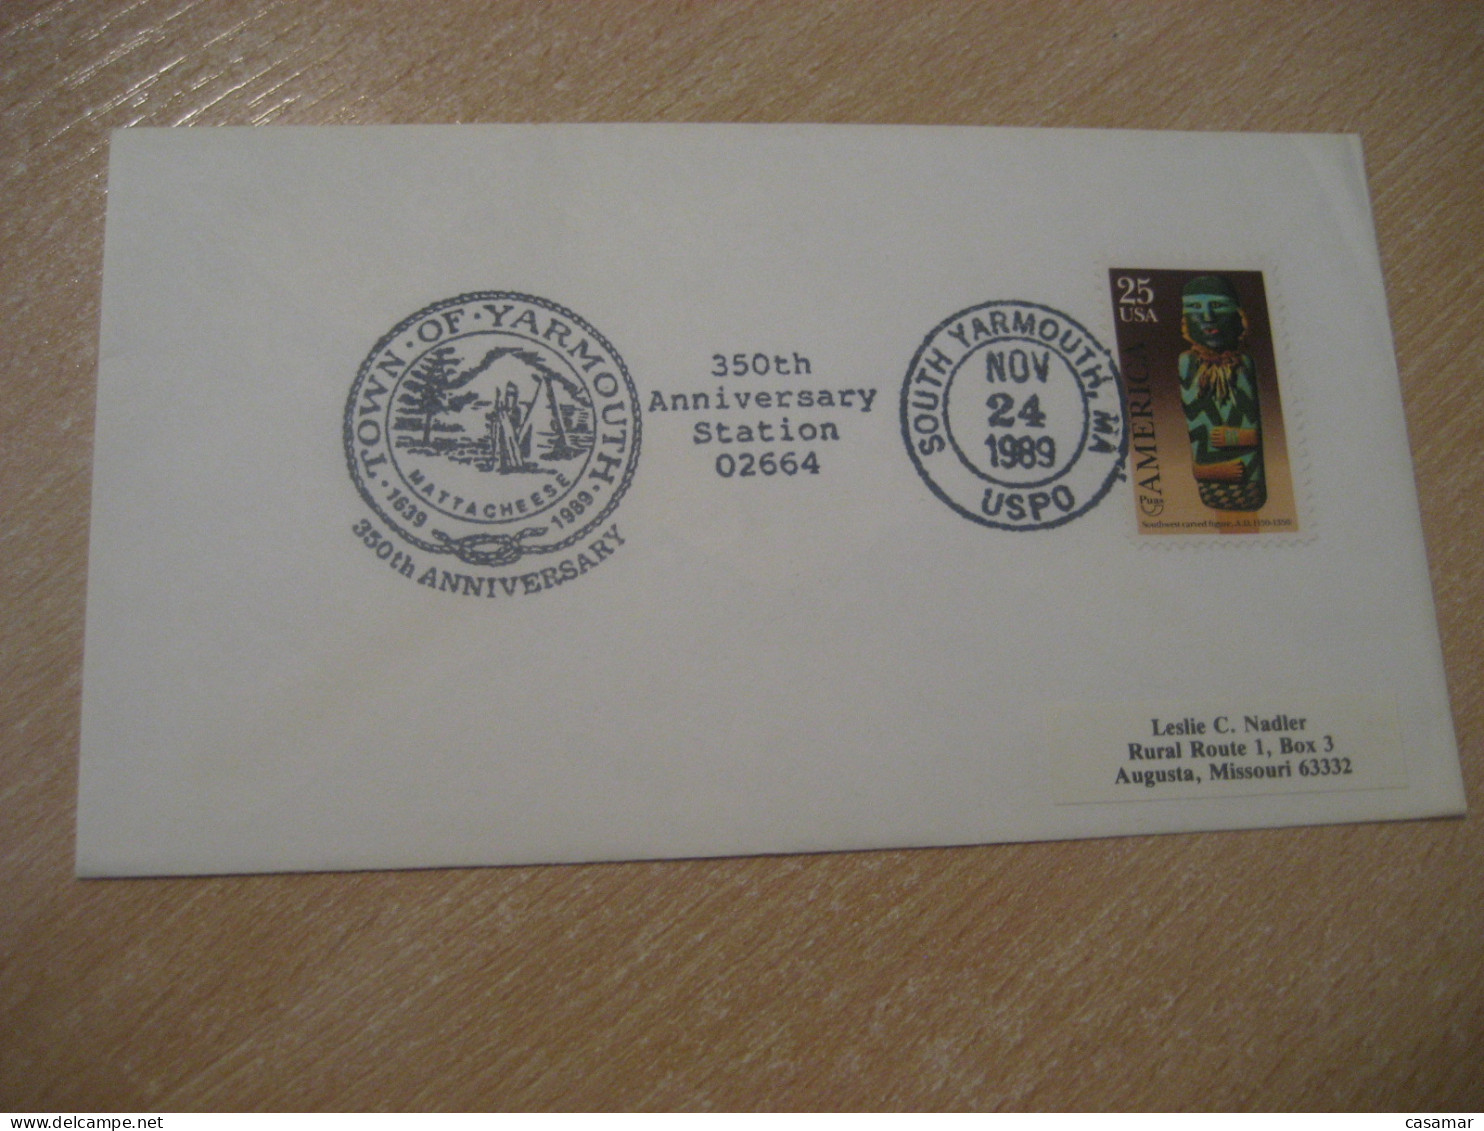 SOUTH YARMOUTH 1989 Town Mattacheese American Indians Indian Cancel Cover USA Indigenous Native History - American Indians